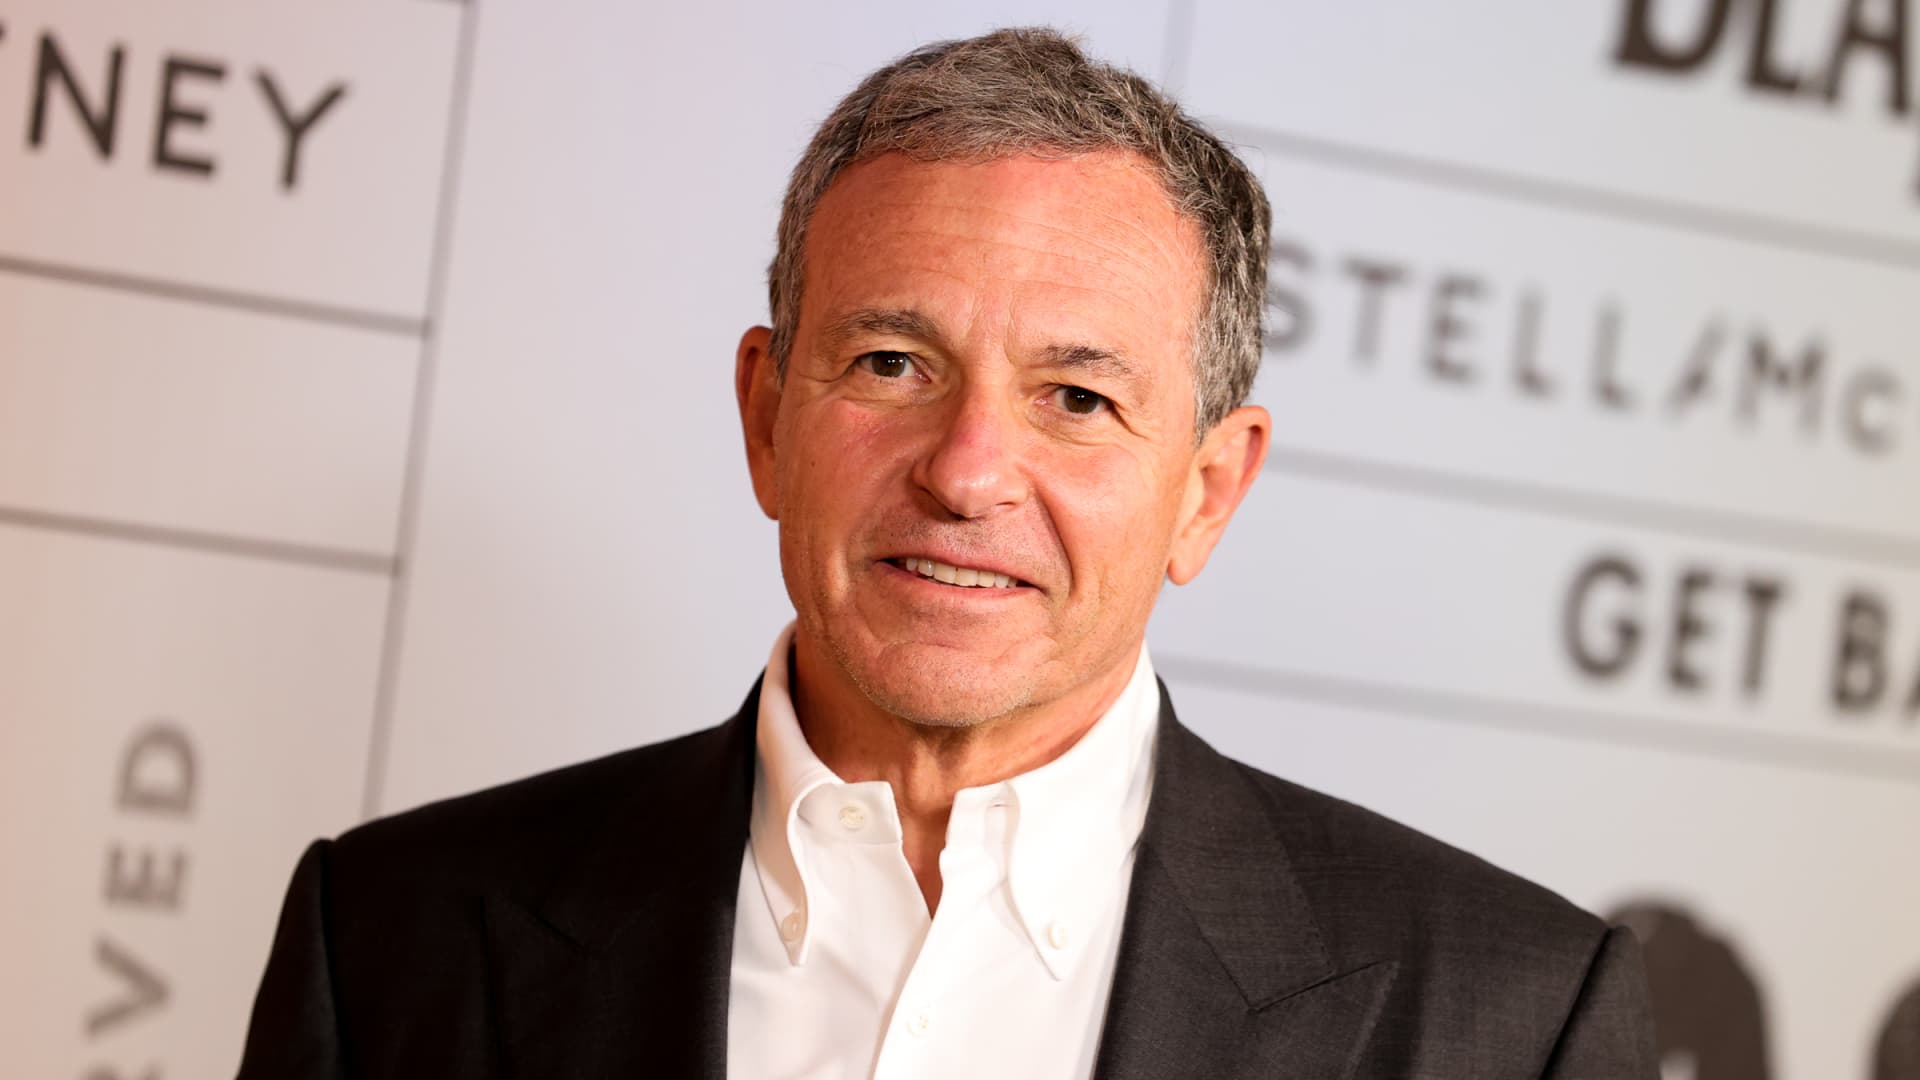 Moviegoing will not return to pre-pandemic ranges, says Disney’s Bob Iger